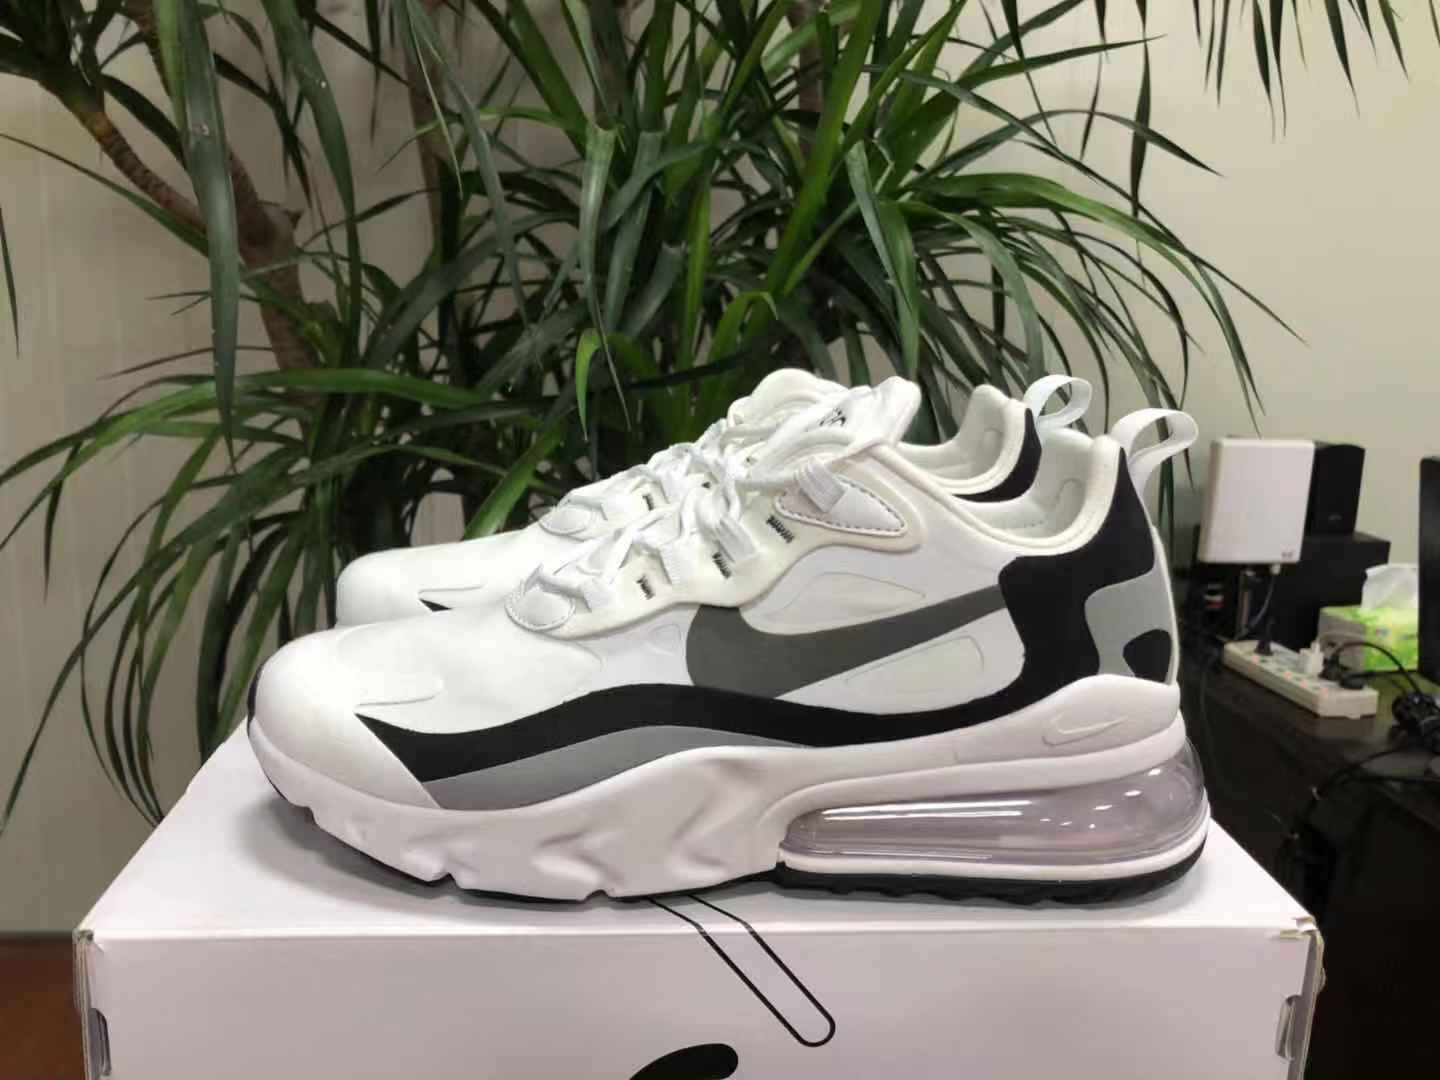 Men's Hot sale Running weapon Nike Air Max Shoes 054